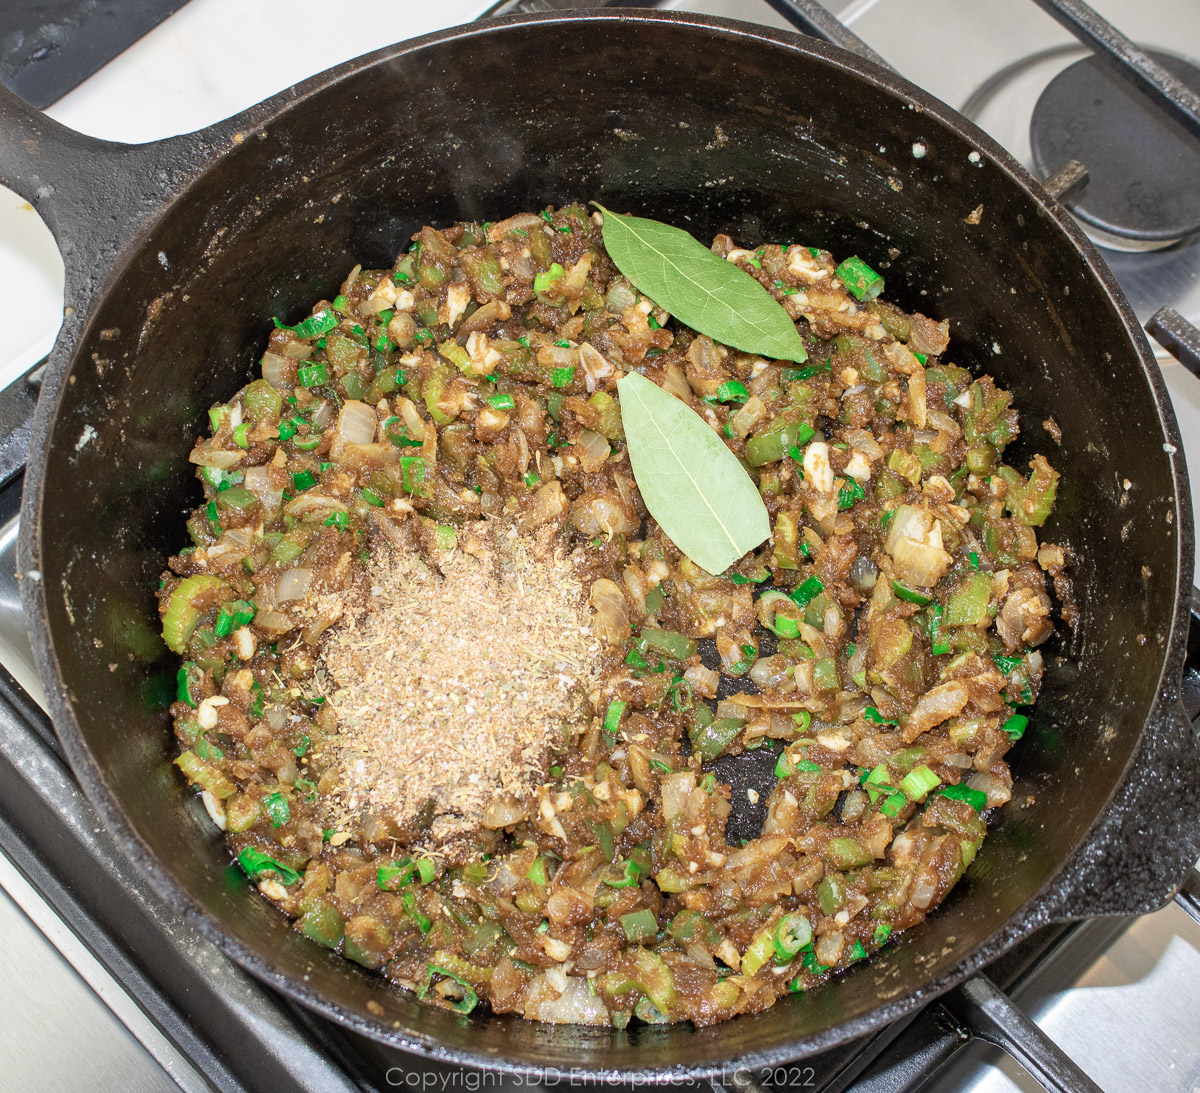 seasonings and bay leaves added to a cooked roux